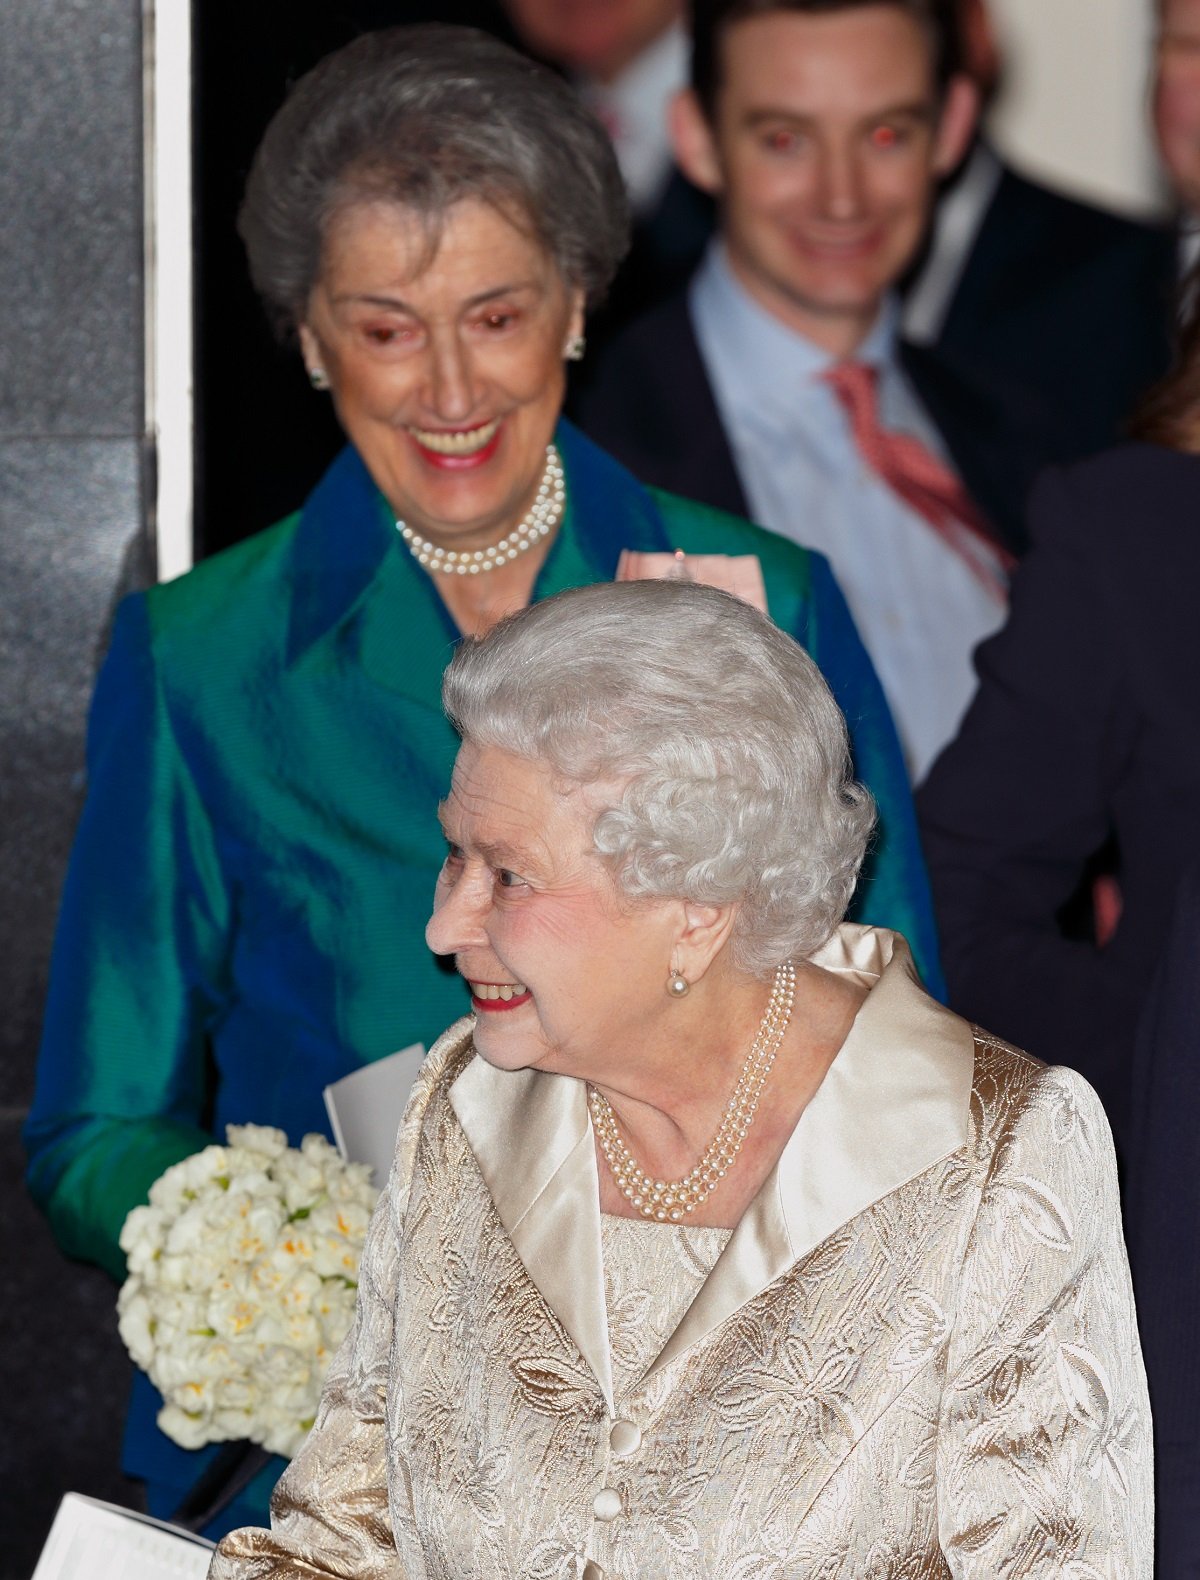 Queen Elizabeth II accompanied by her Lady-in-Waiting Lady Susan Hussey as they depart the Gold Service Scholarship awards ceremony in London